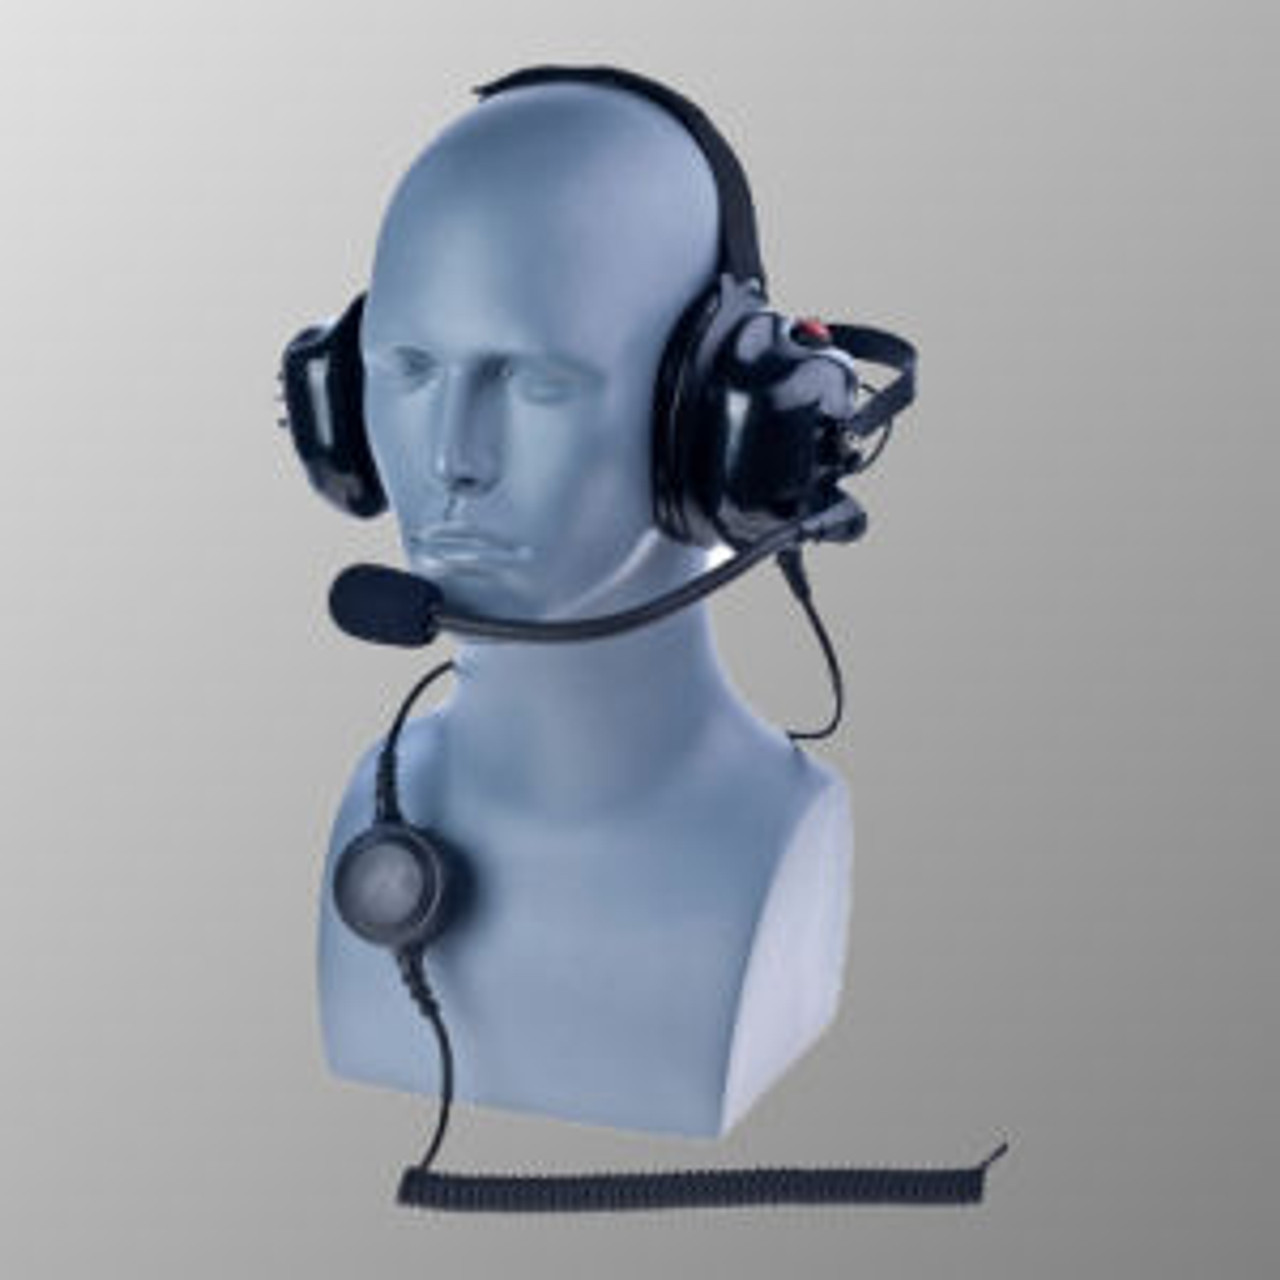 ICOM IC-F11S Noise Canceling Behind The Head Double Muff Headset